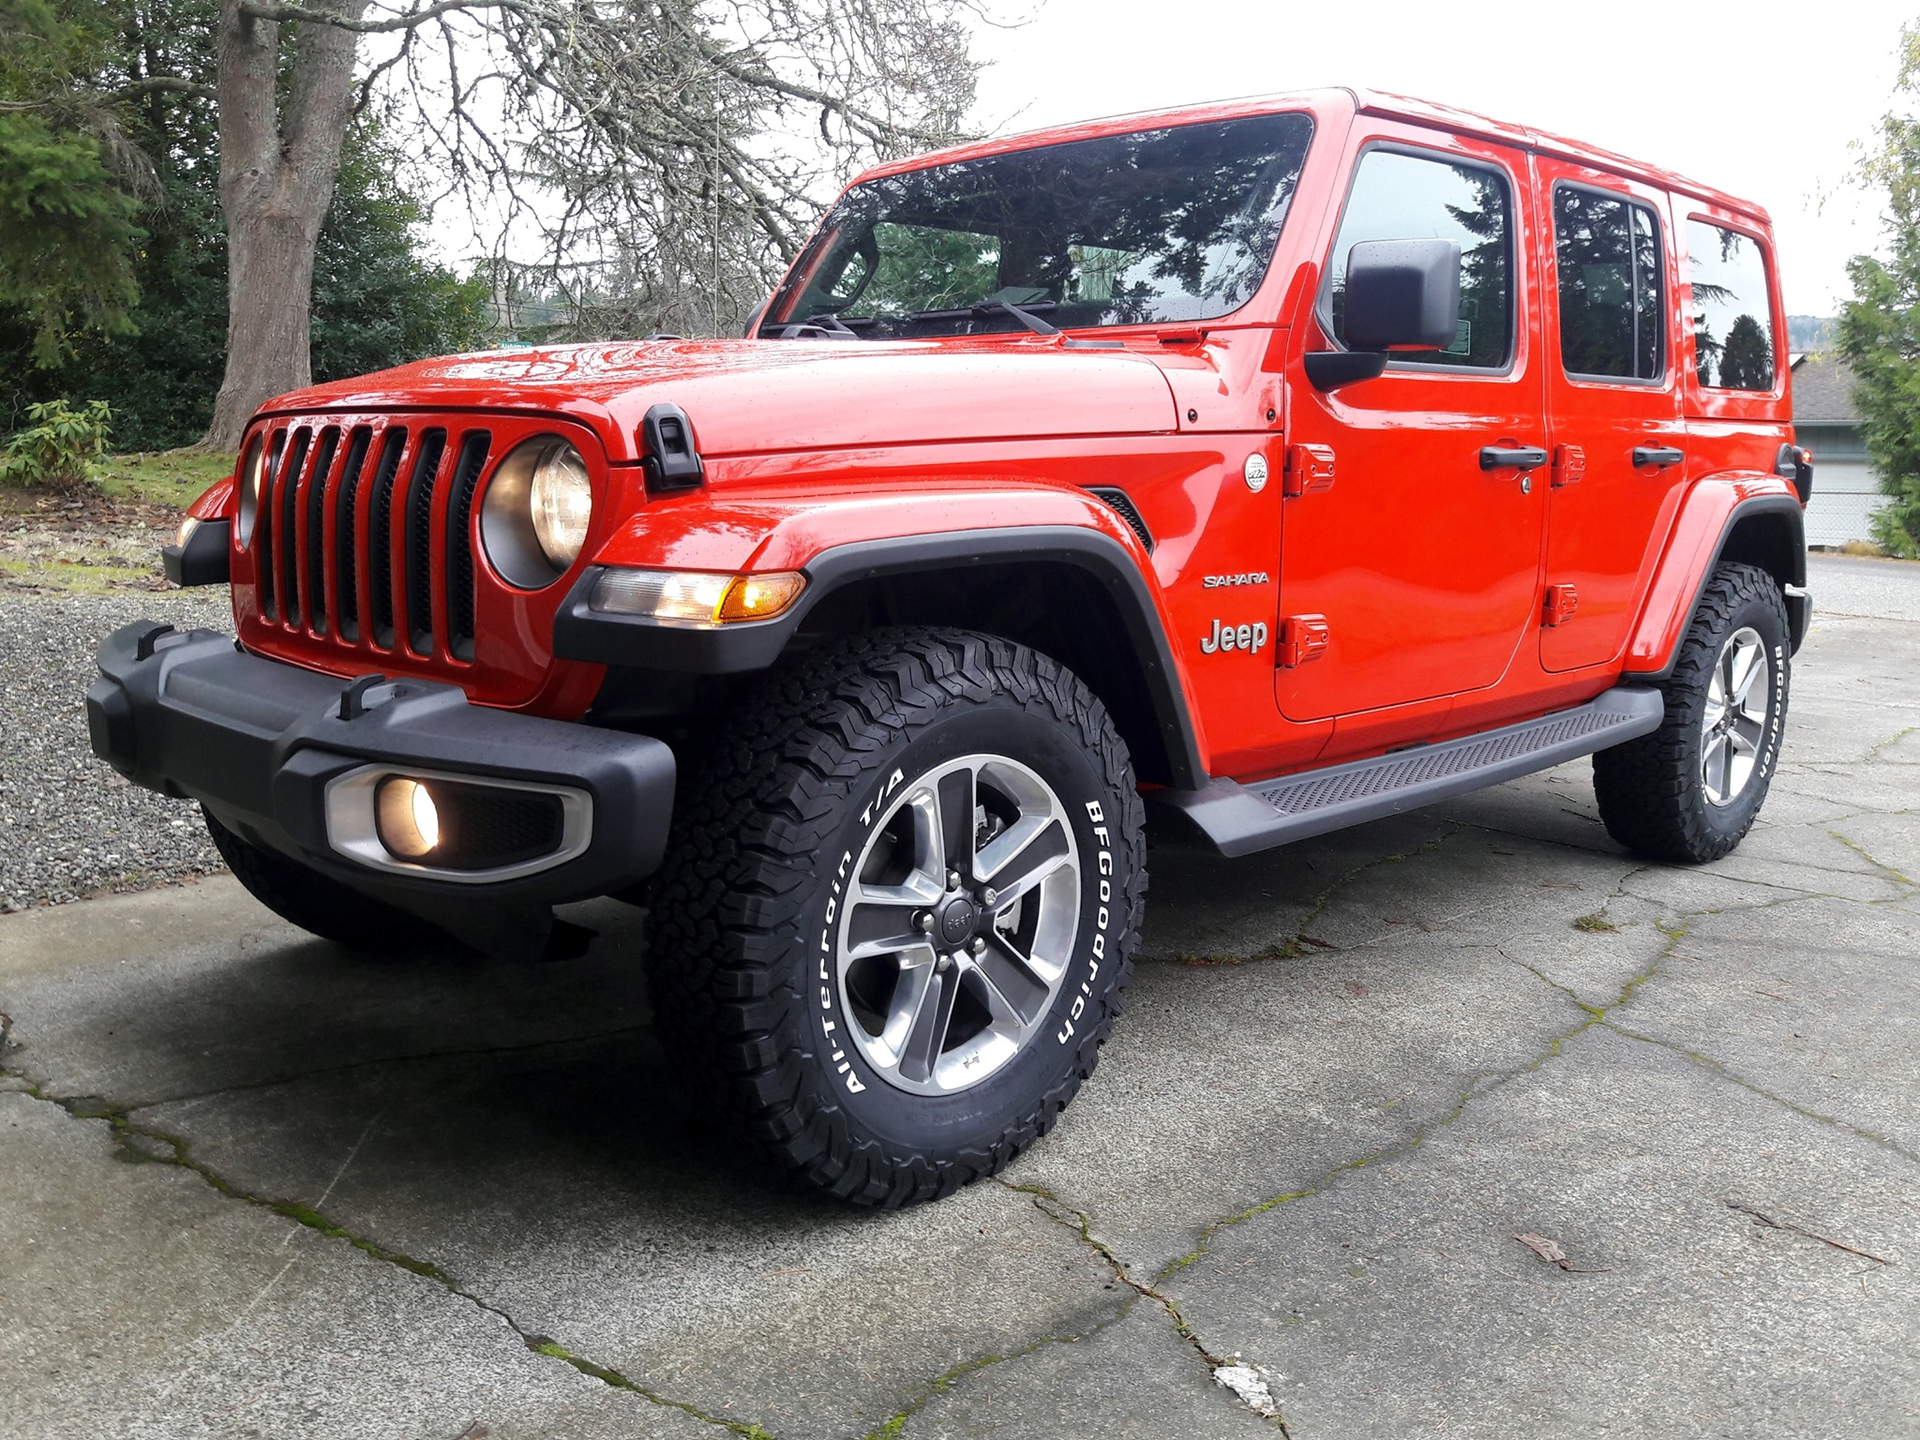 17 or 18 inch wheels on 33 inch tires | Jeep Wrangler Forum